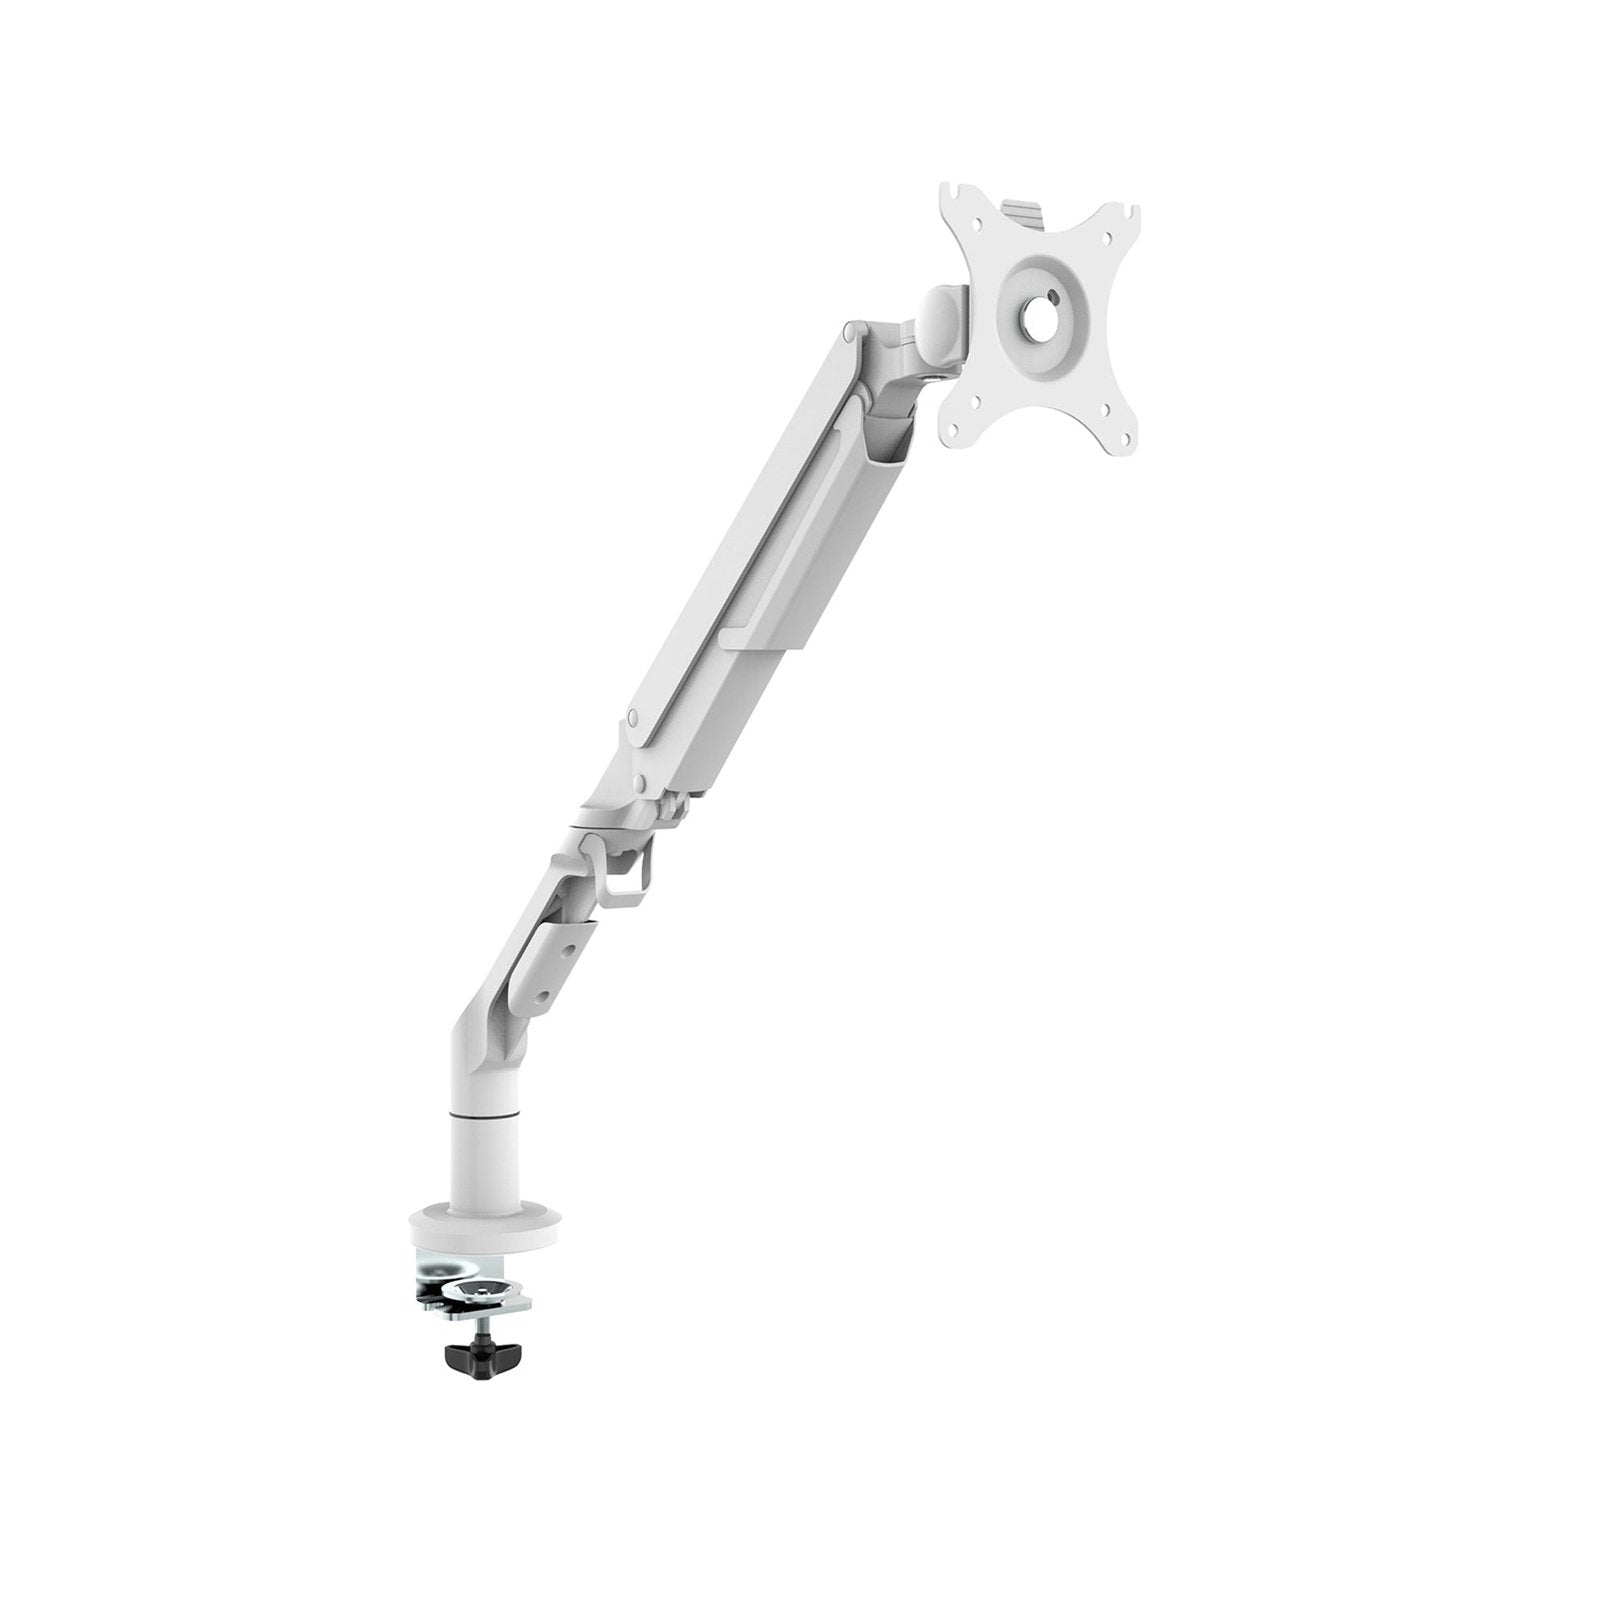 Triton gas lift single monitor arm - Office Products Online